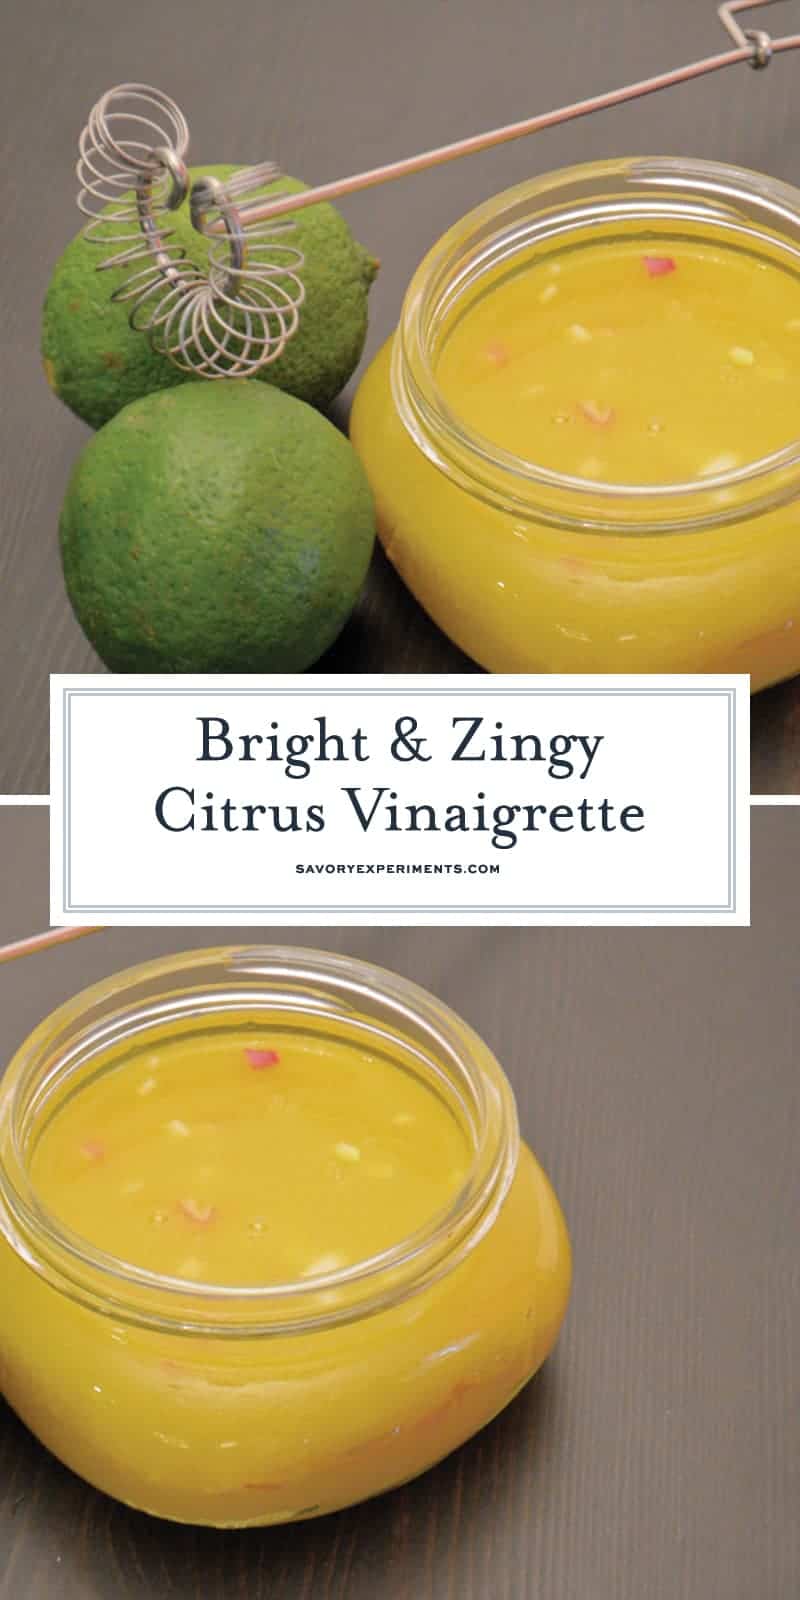 This Refreshing Citrus Vinaigrette Recipe is so easy and can be used on a salad, as a marinade for chicken or fish, and even as a dipping sauce for grilled veggies! #citrusvinaigrette #homemadesaladdressingrecipe www.savoryexperiments.com